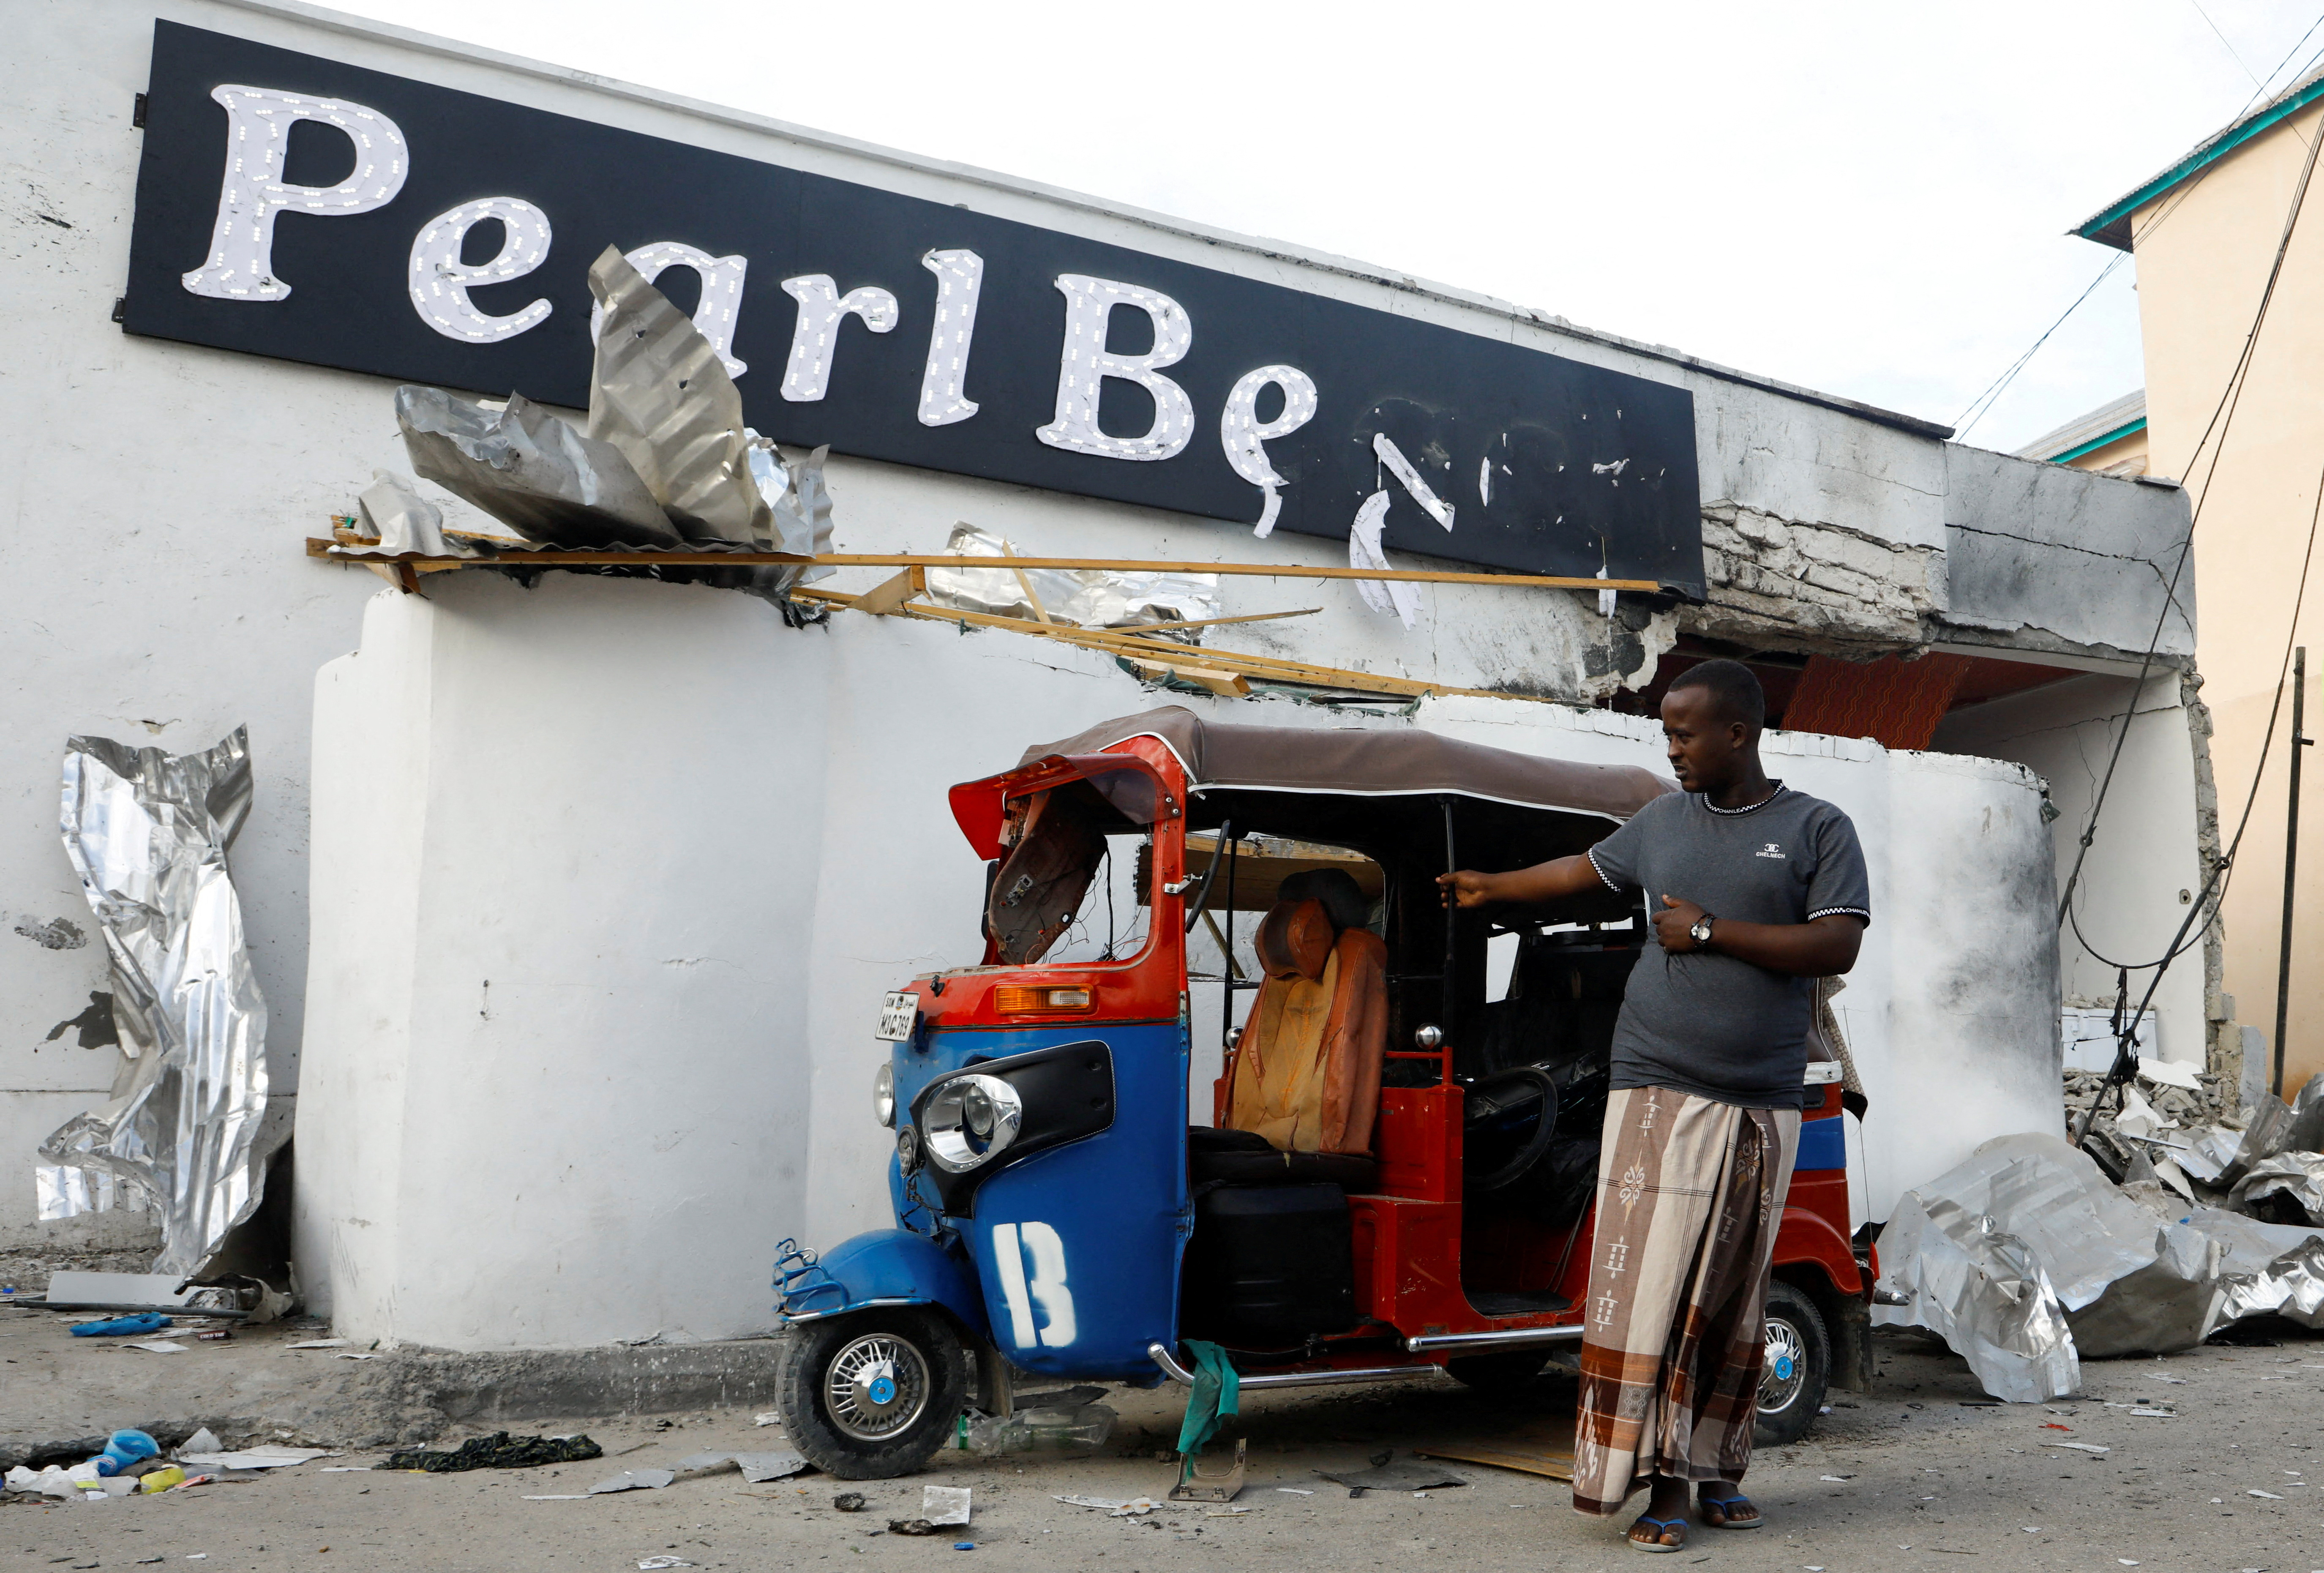 A driver looks at the wreckage of a rickshaw destroyed during an attack by Al Shabaab militants in front of the Pearl beach restaurant at Liido beach in Mogadishu